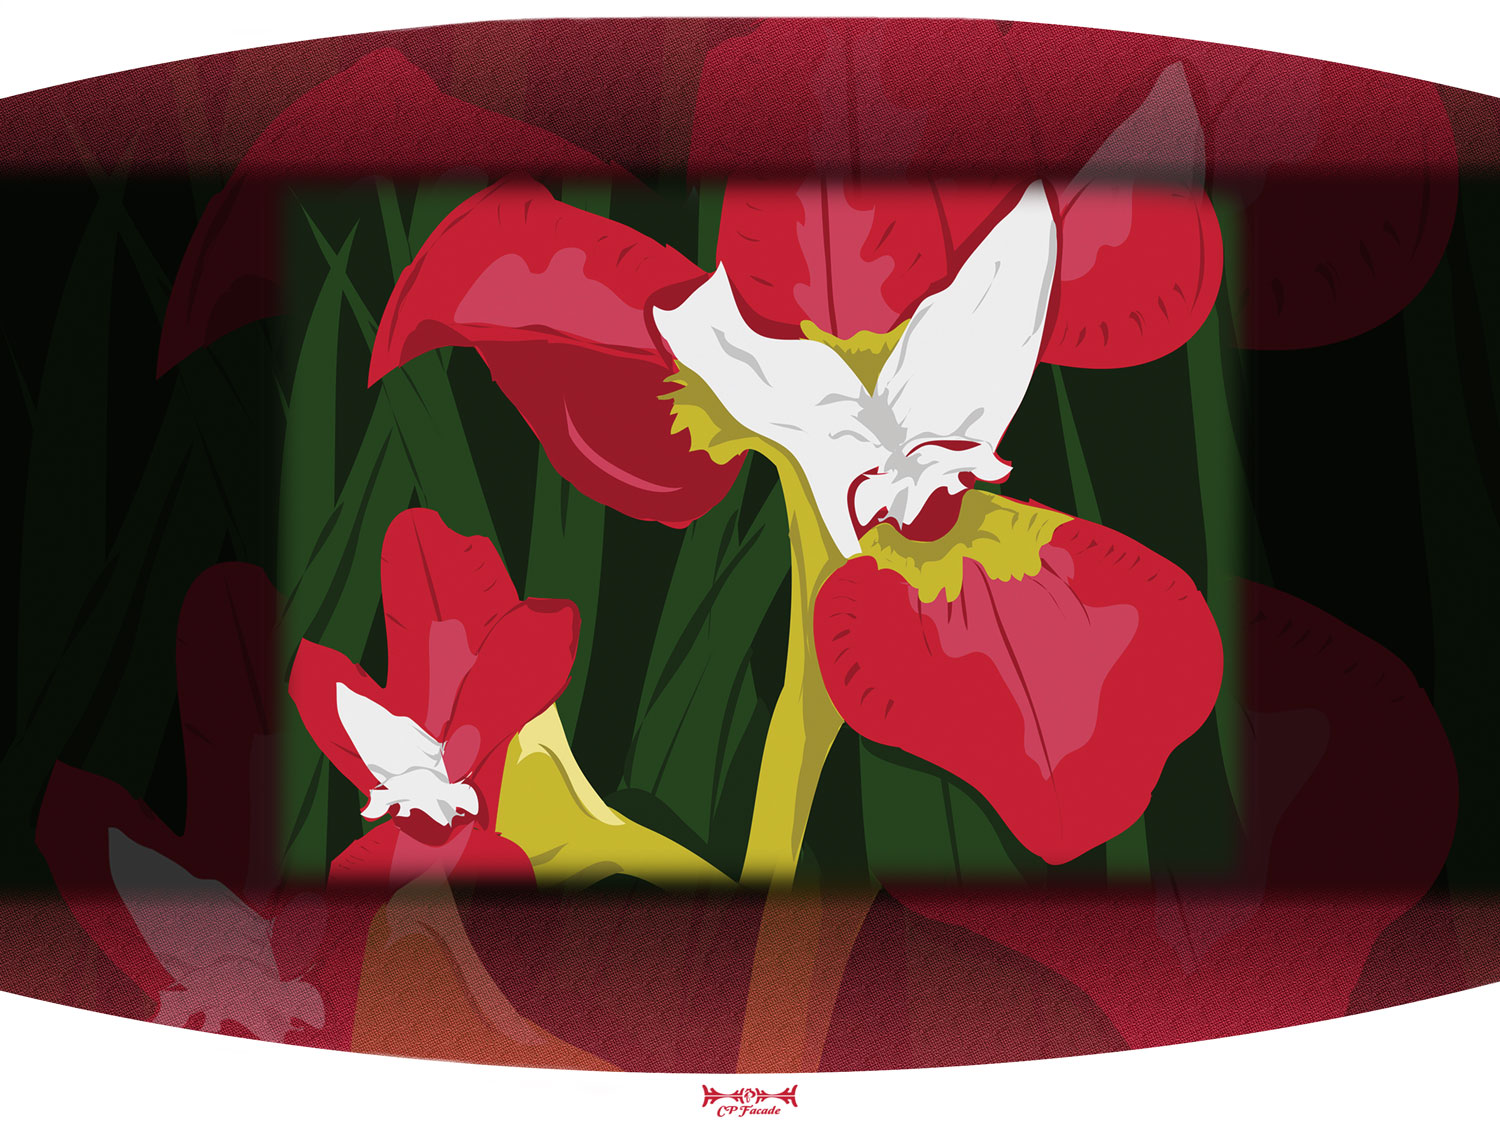 Custom Illustration of a red lily flower